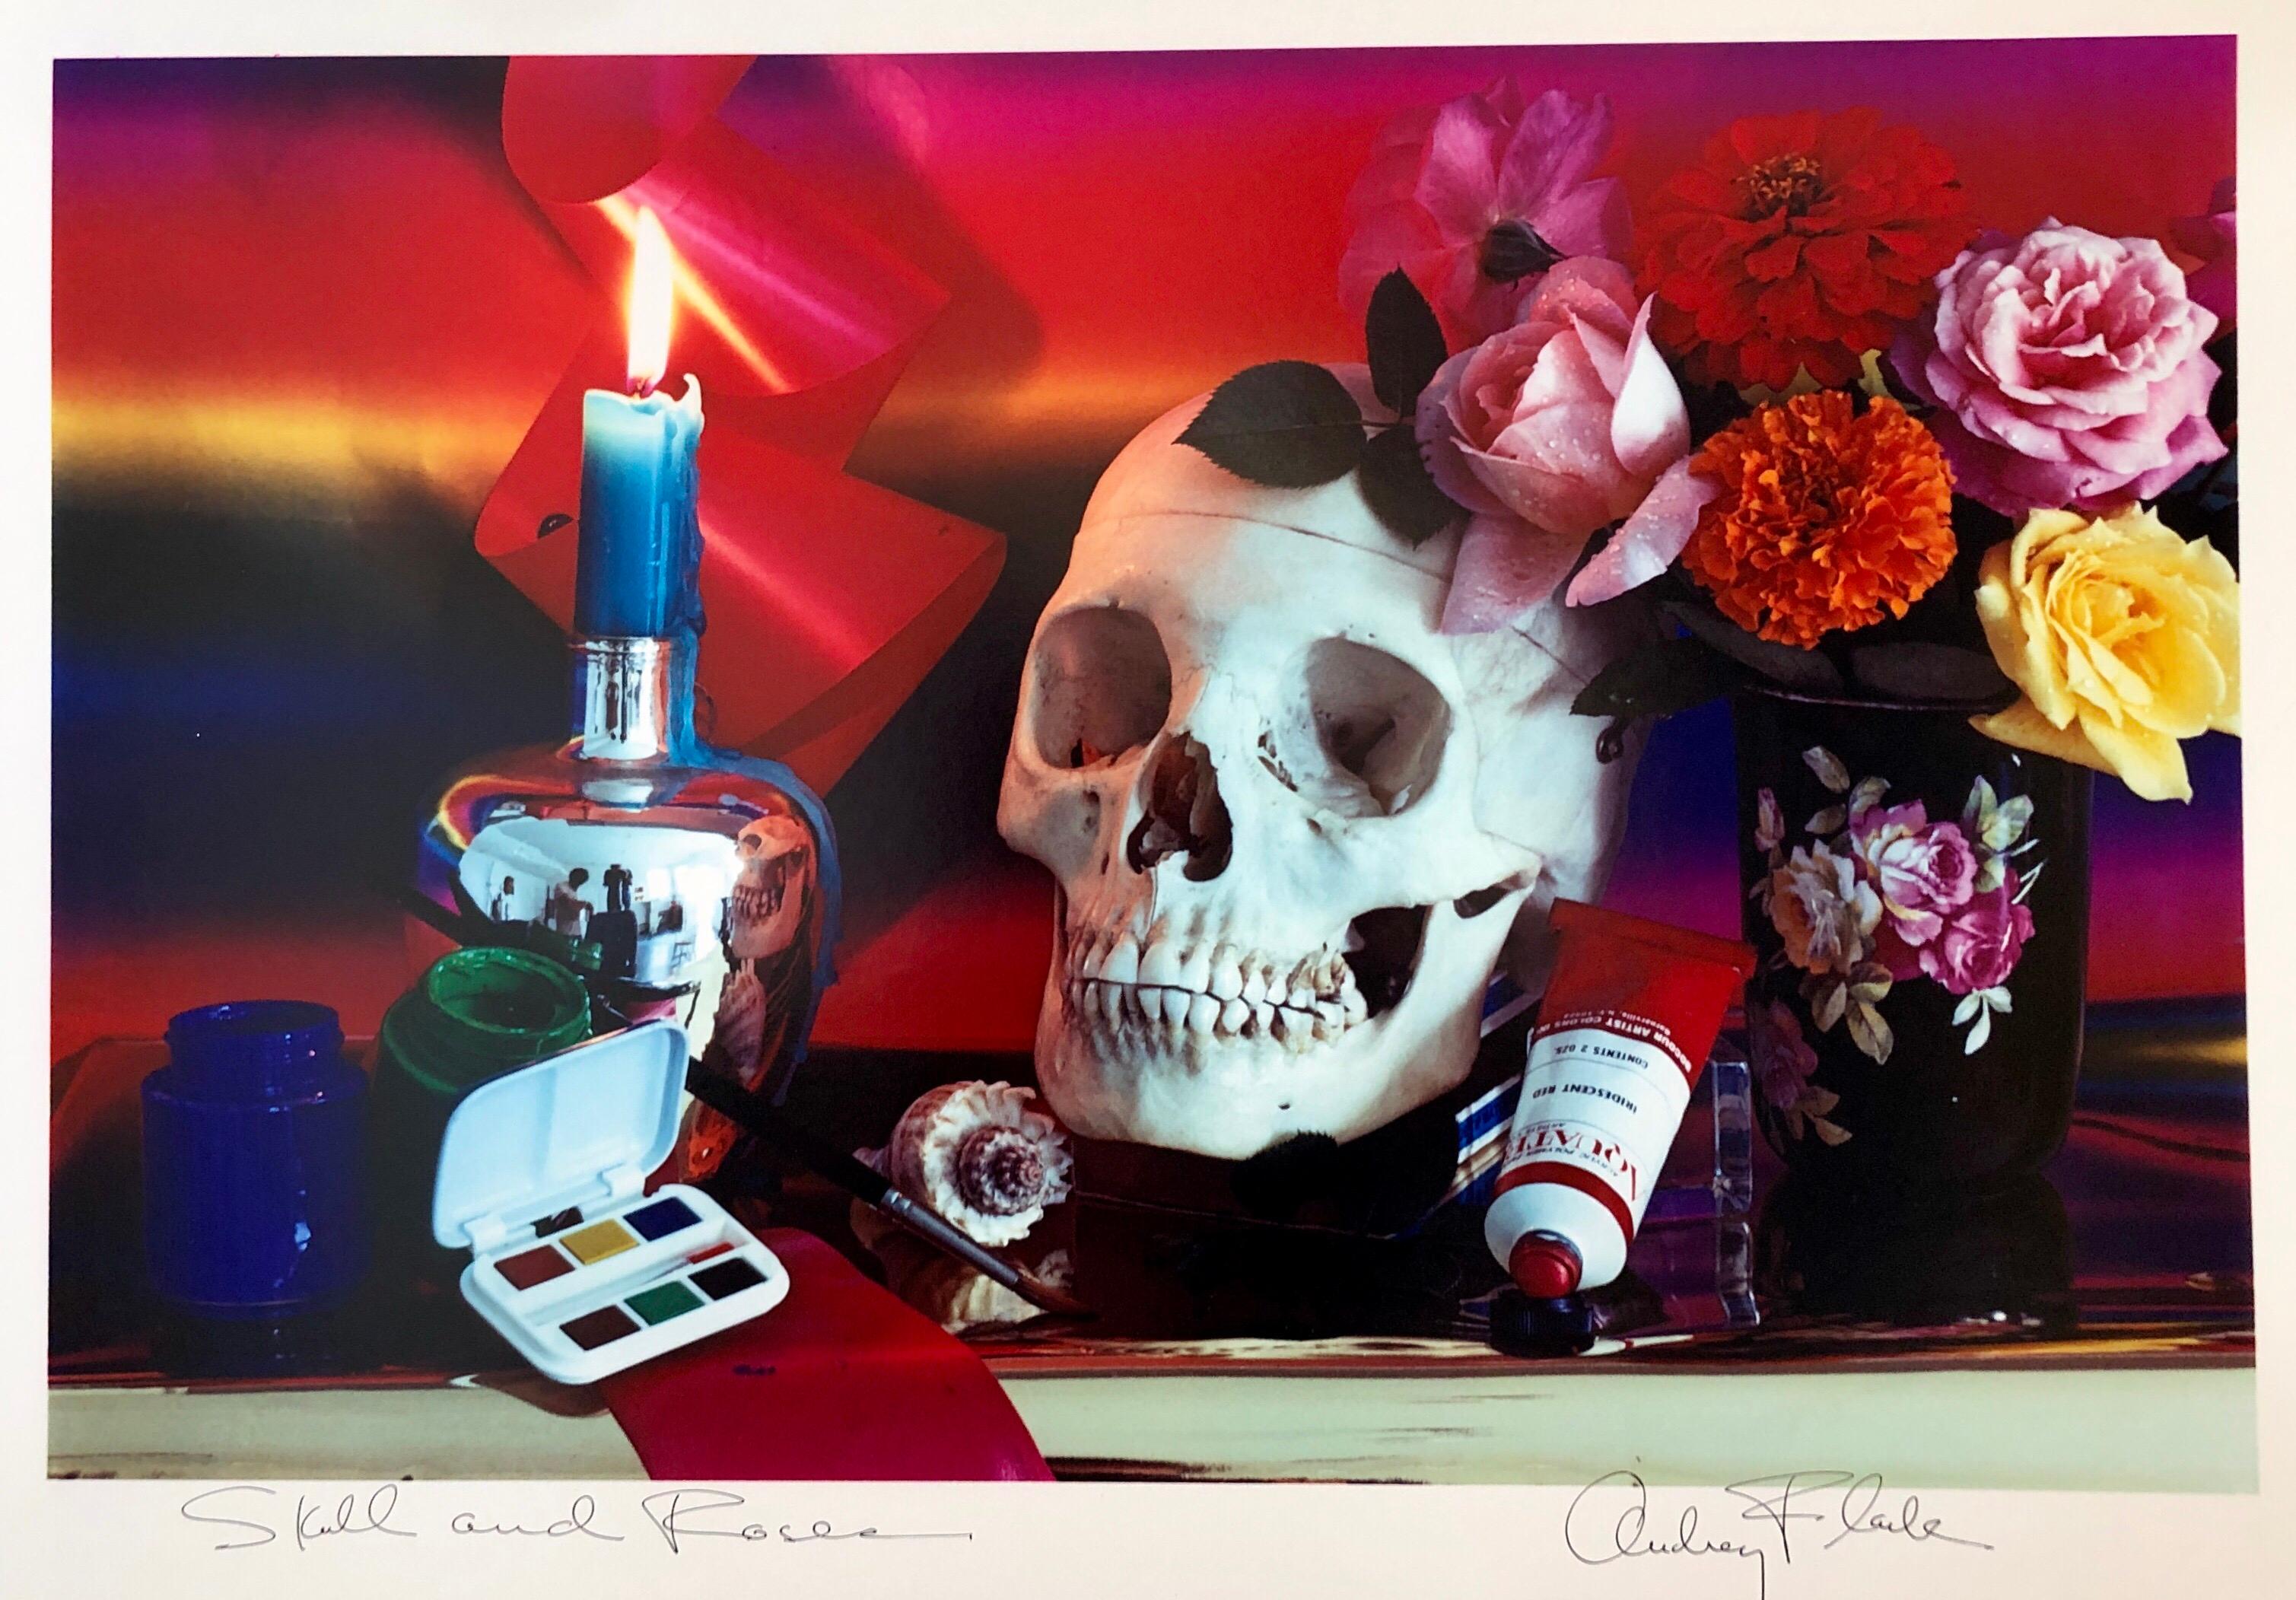 Hand signed and titled in ink by the artist from edition of 50 (plus proofs). Color Photo printed at CVI Lab by master printer Guy Stricherz. Published by Prestige Art Ltd. From the color saturated 1980's. "Skull and Roses" featuring a skull,